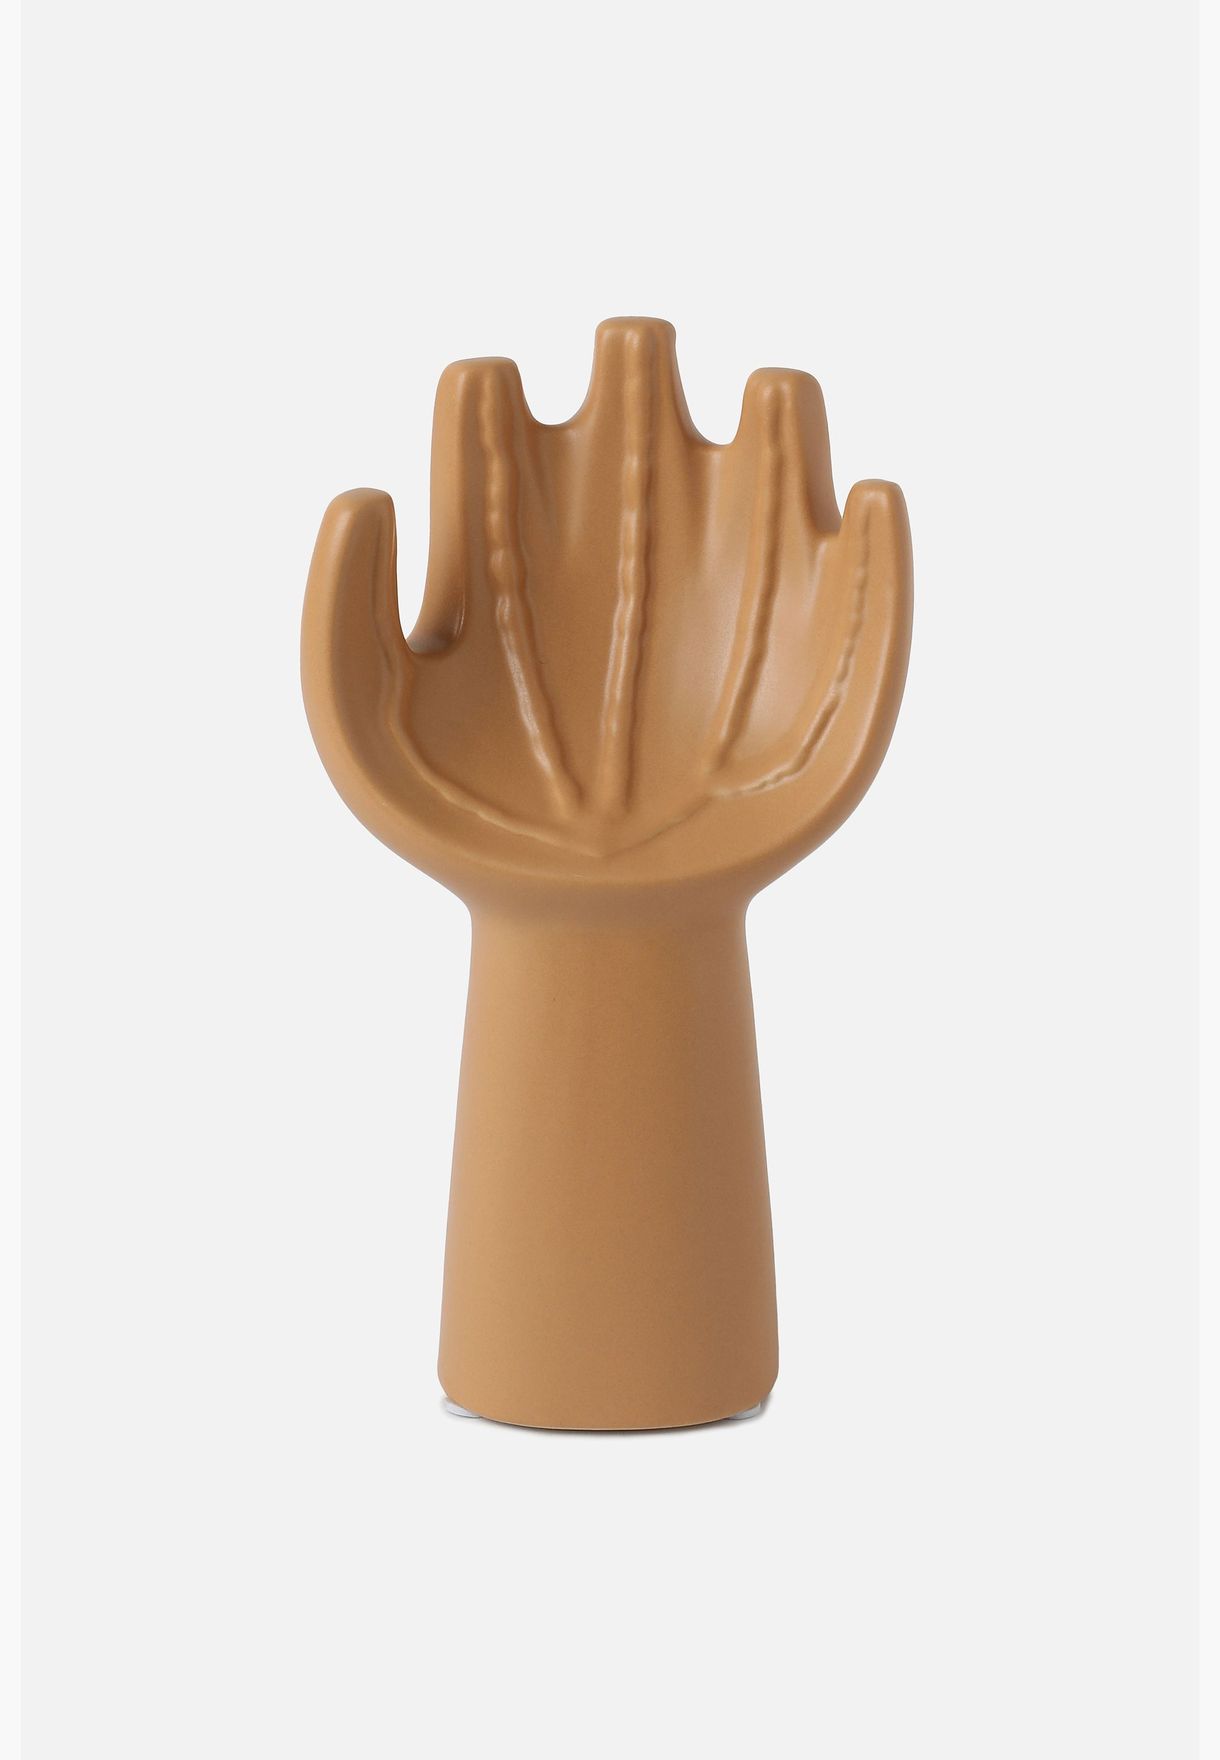 Hand Shaped Solid Modern Ceramic Showpiece For Home Decor 